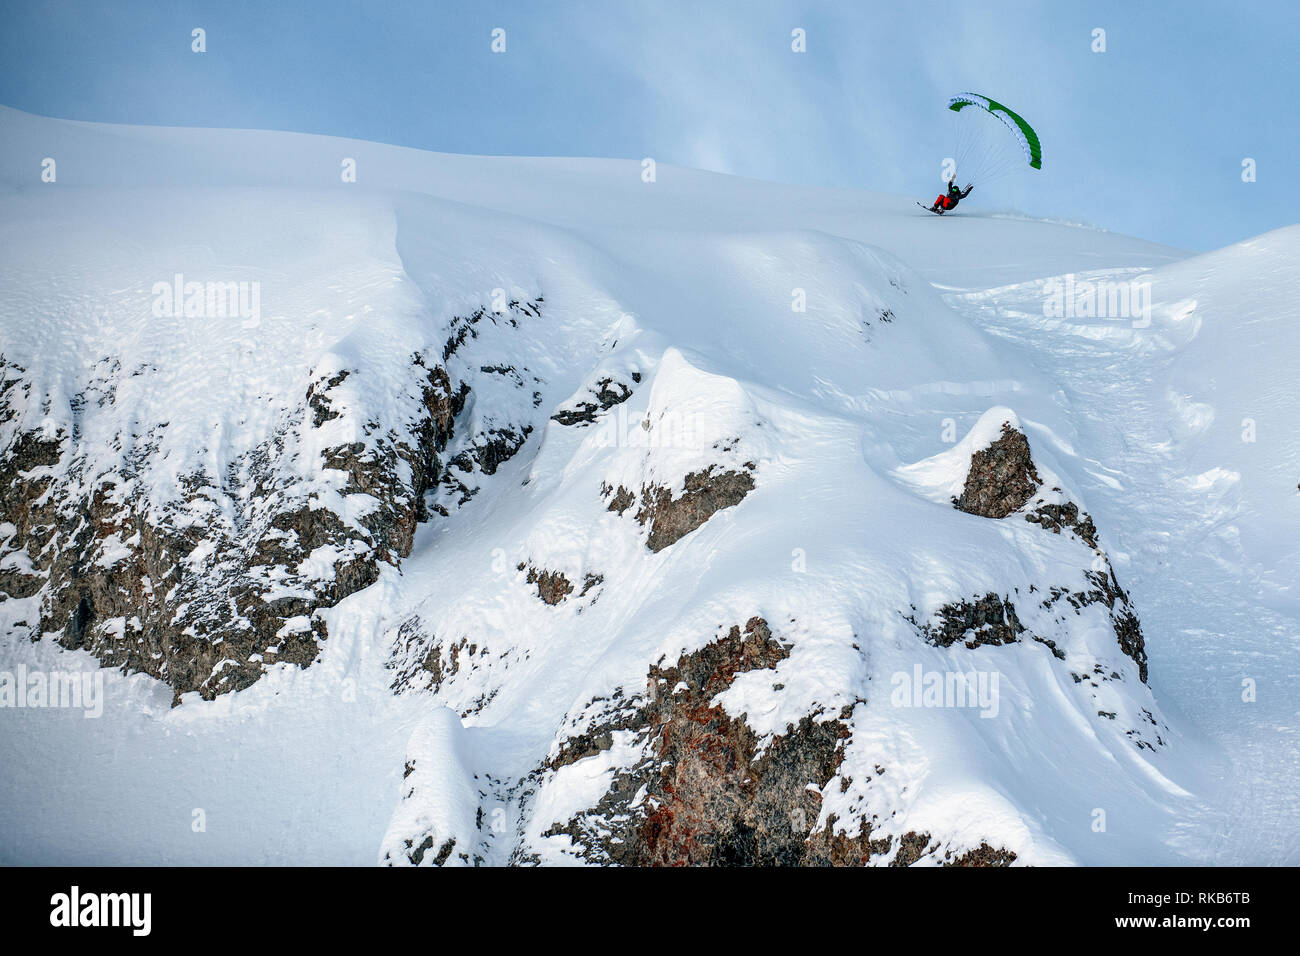 Speed-flying in the French alpine resort of Courchevel. A man flies using a speed-flying wing on skis off a cliff on snow. Stock Photo